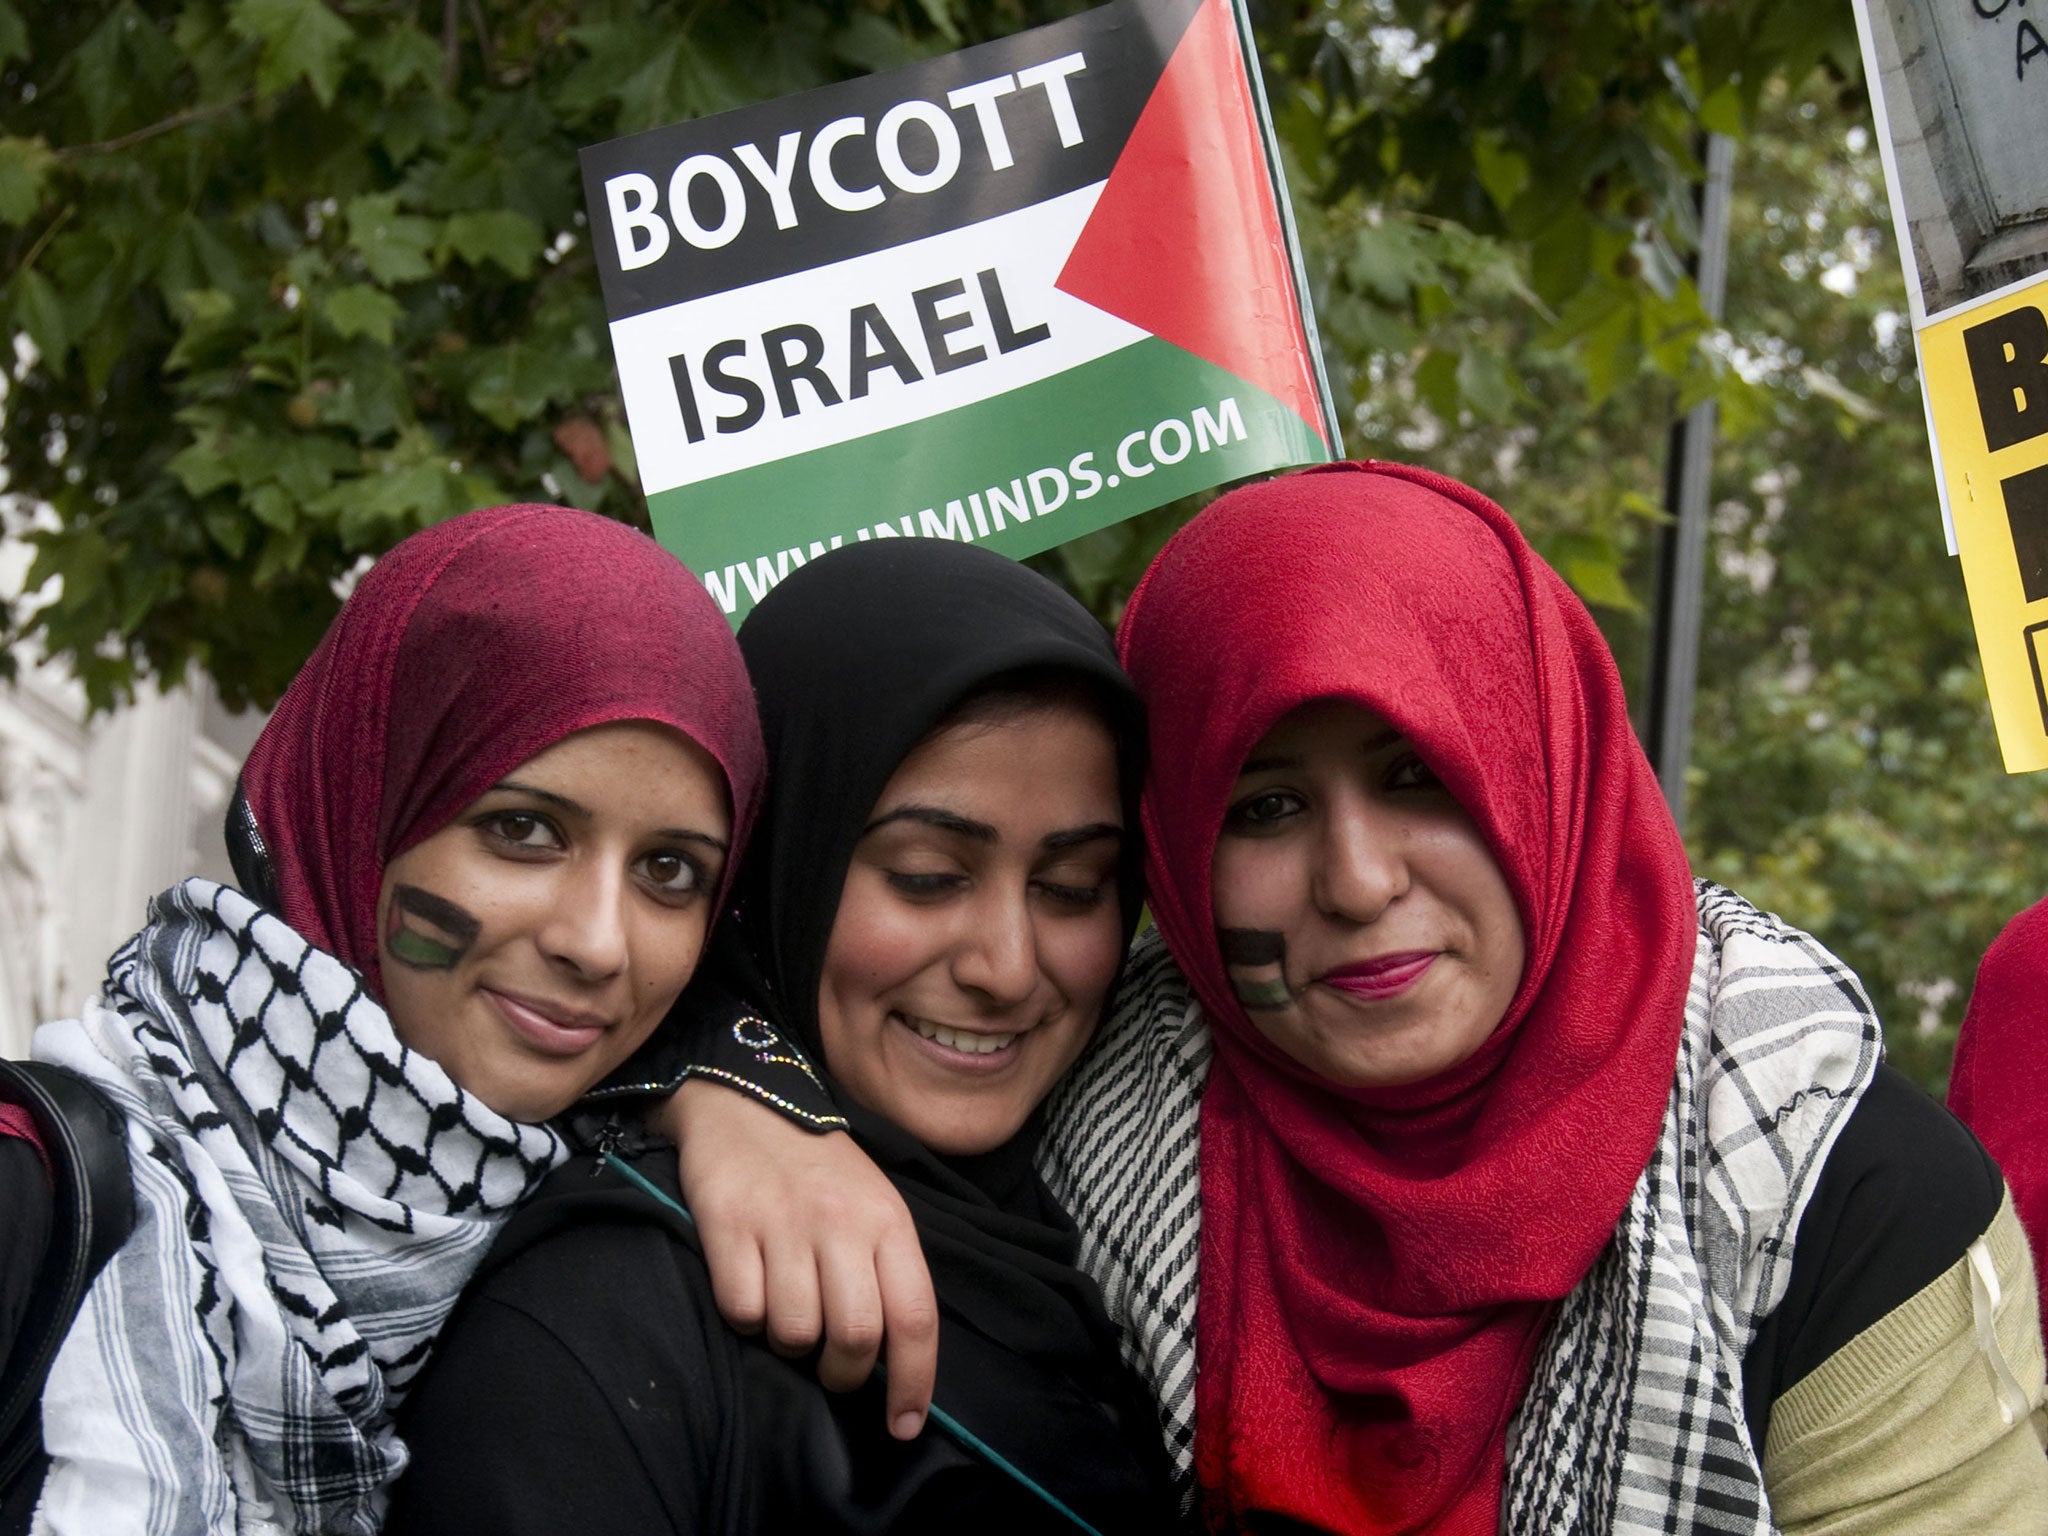 Protesters in London calling for a boycott of Israeli goods